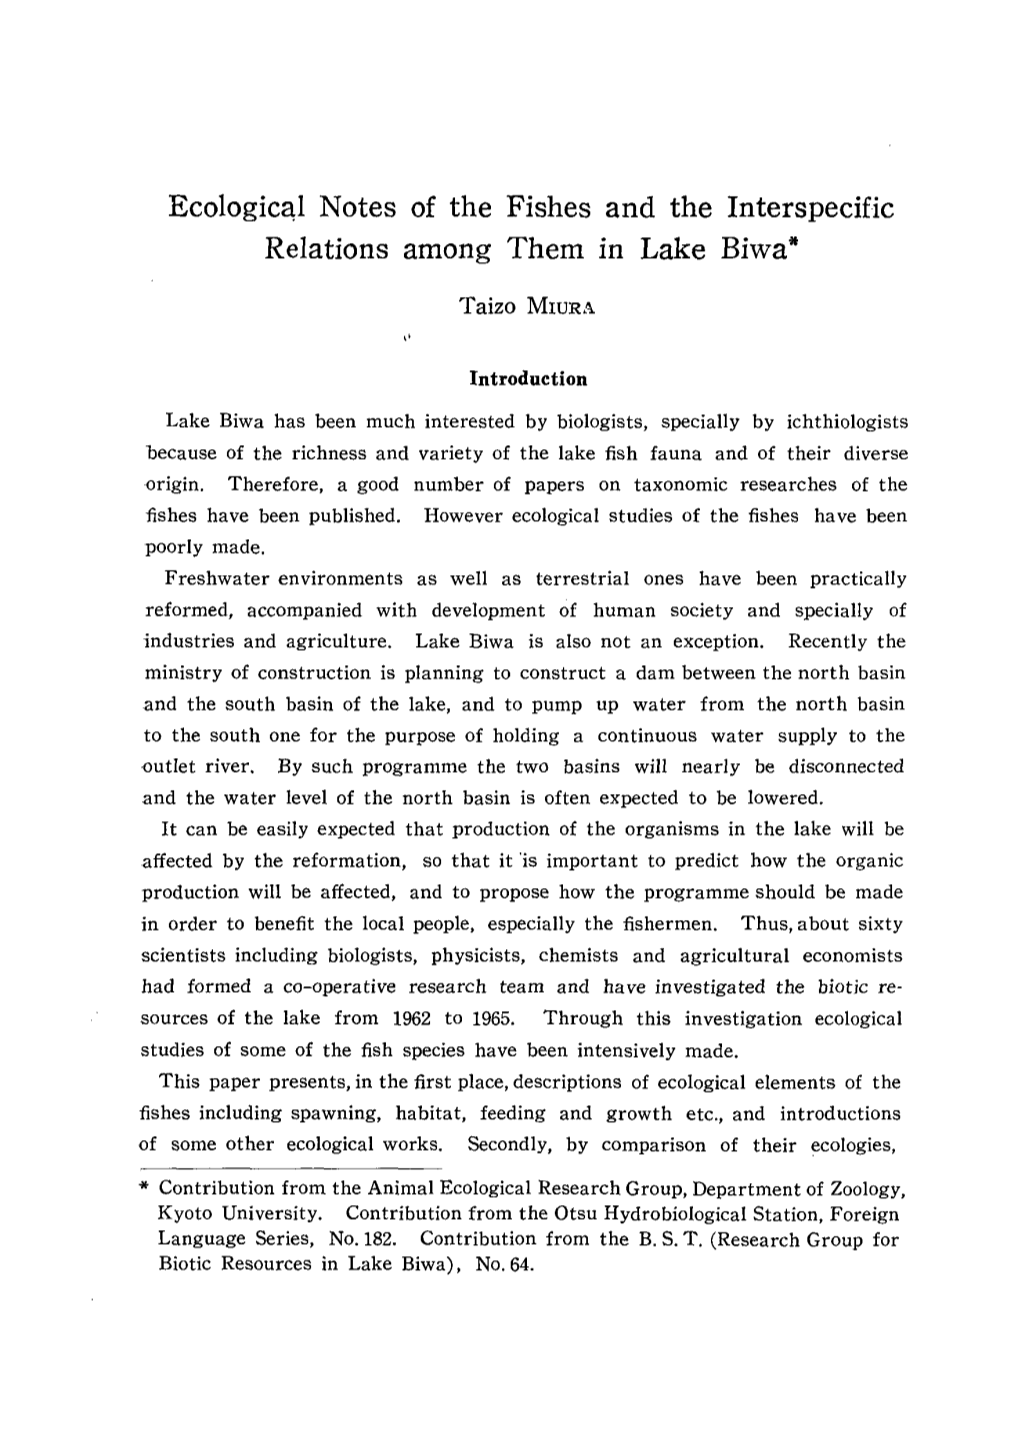 Ecological Notes of the Fishes and the Interspecific Relations Among Them in Lake Biwa